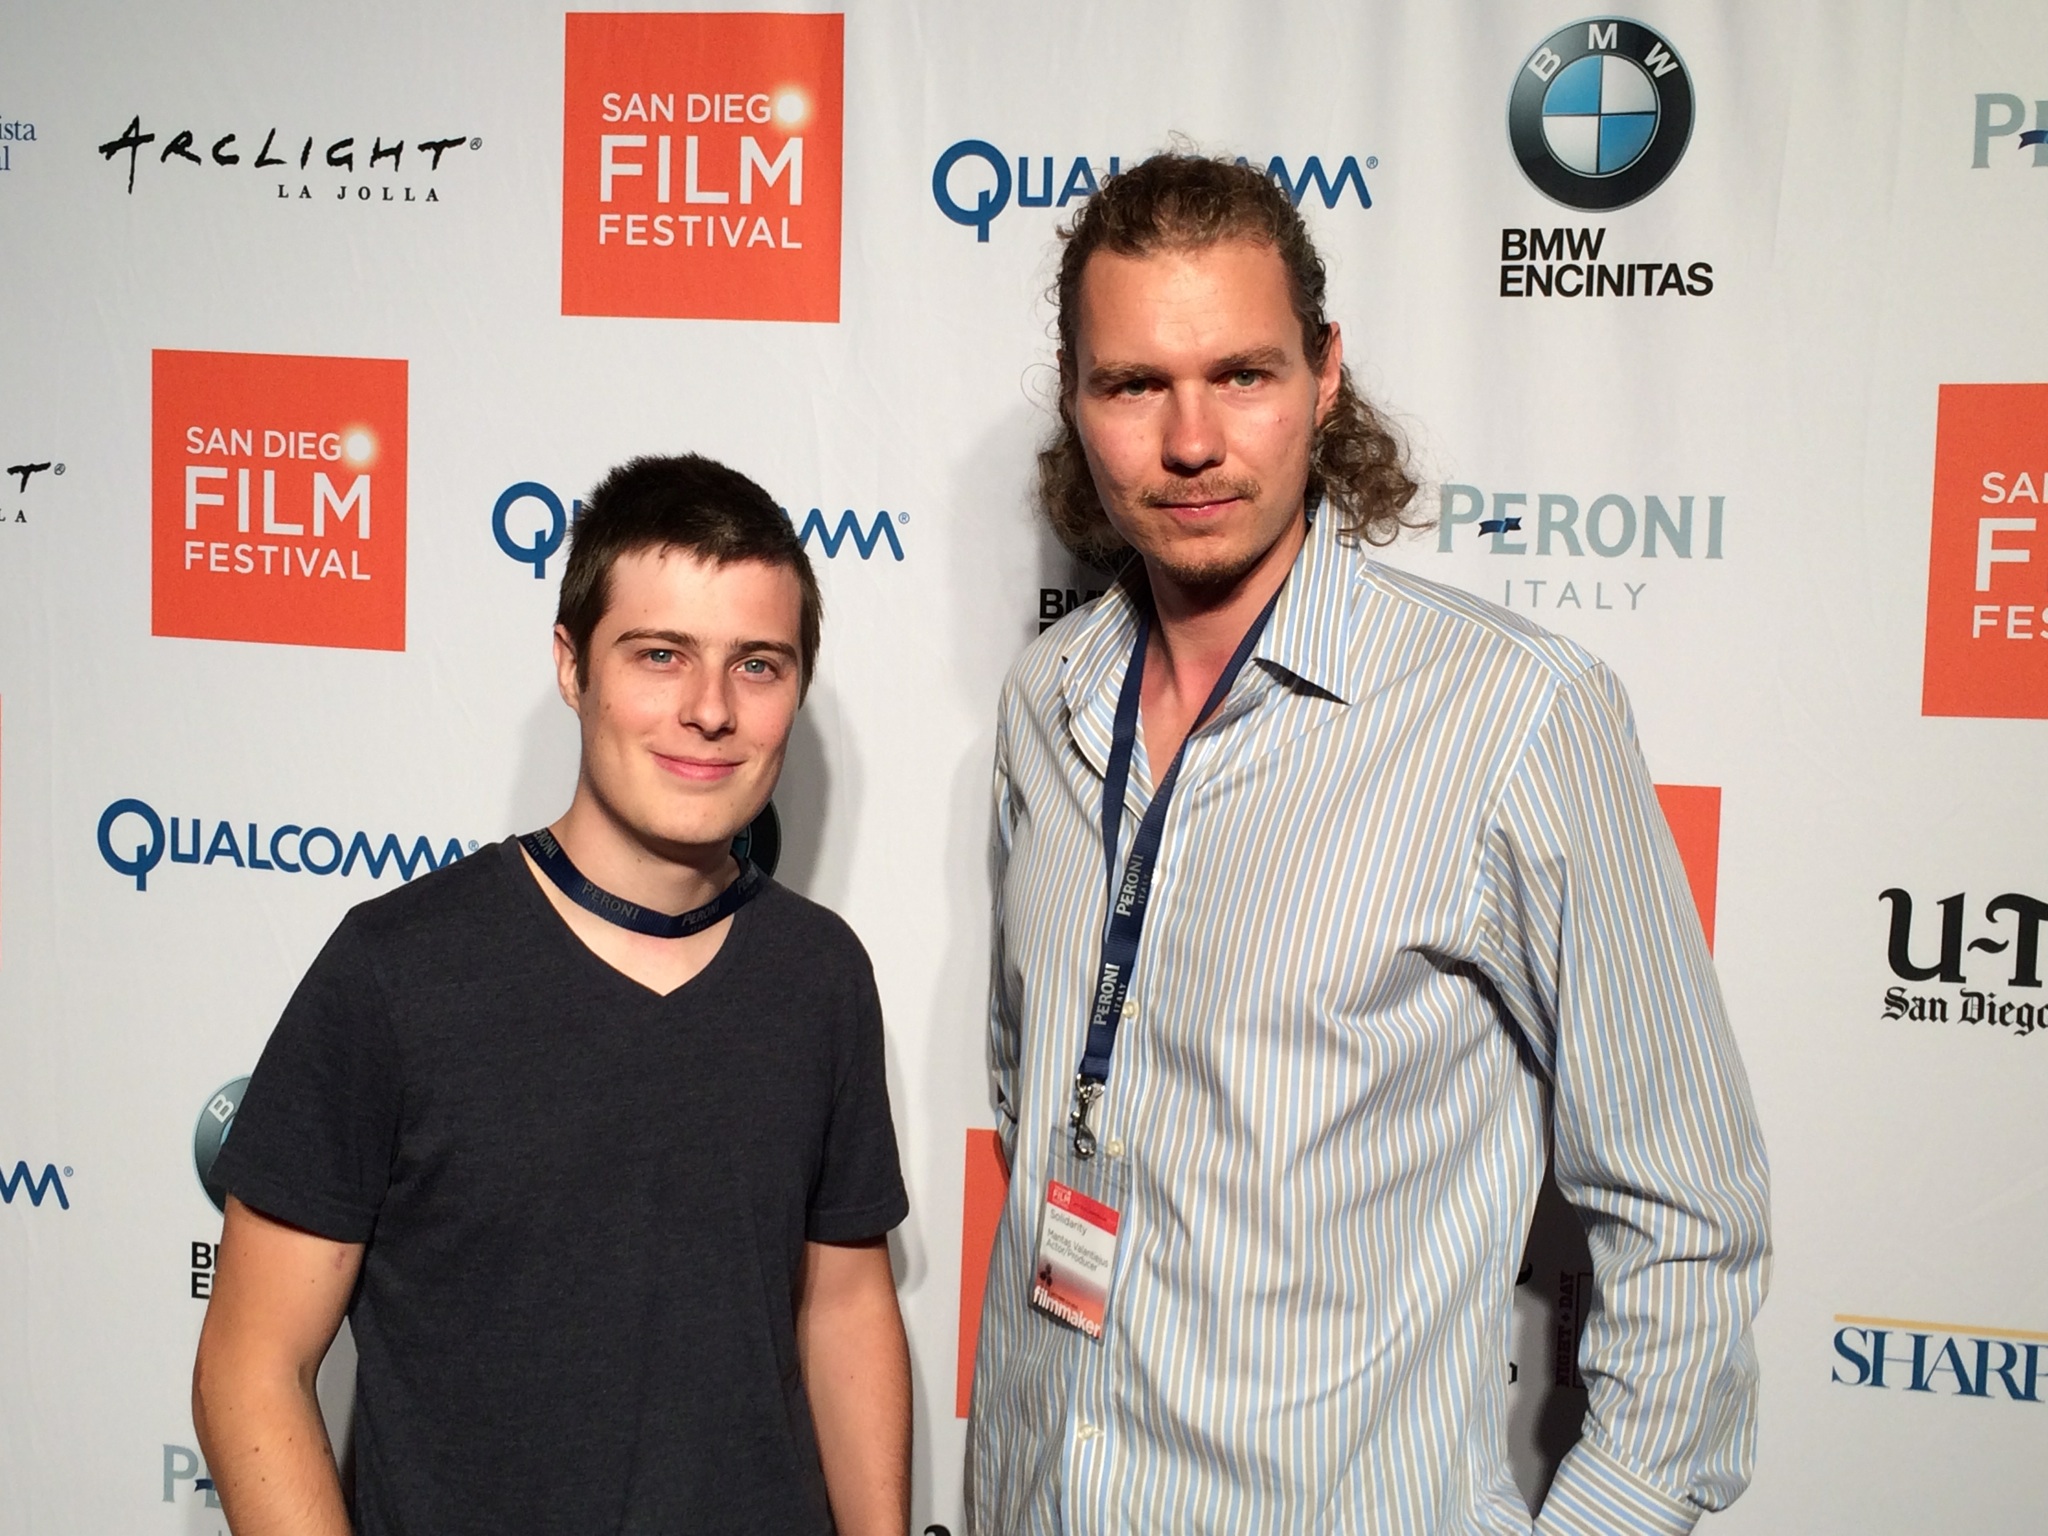 Dustin Brown (left) and Mantas Valantiejus (right) at the 2013 San Diego Film Festival. 